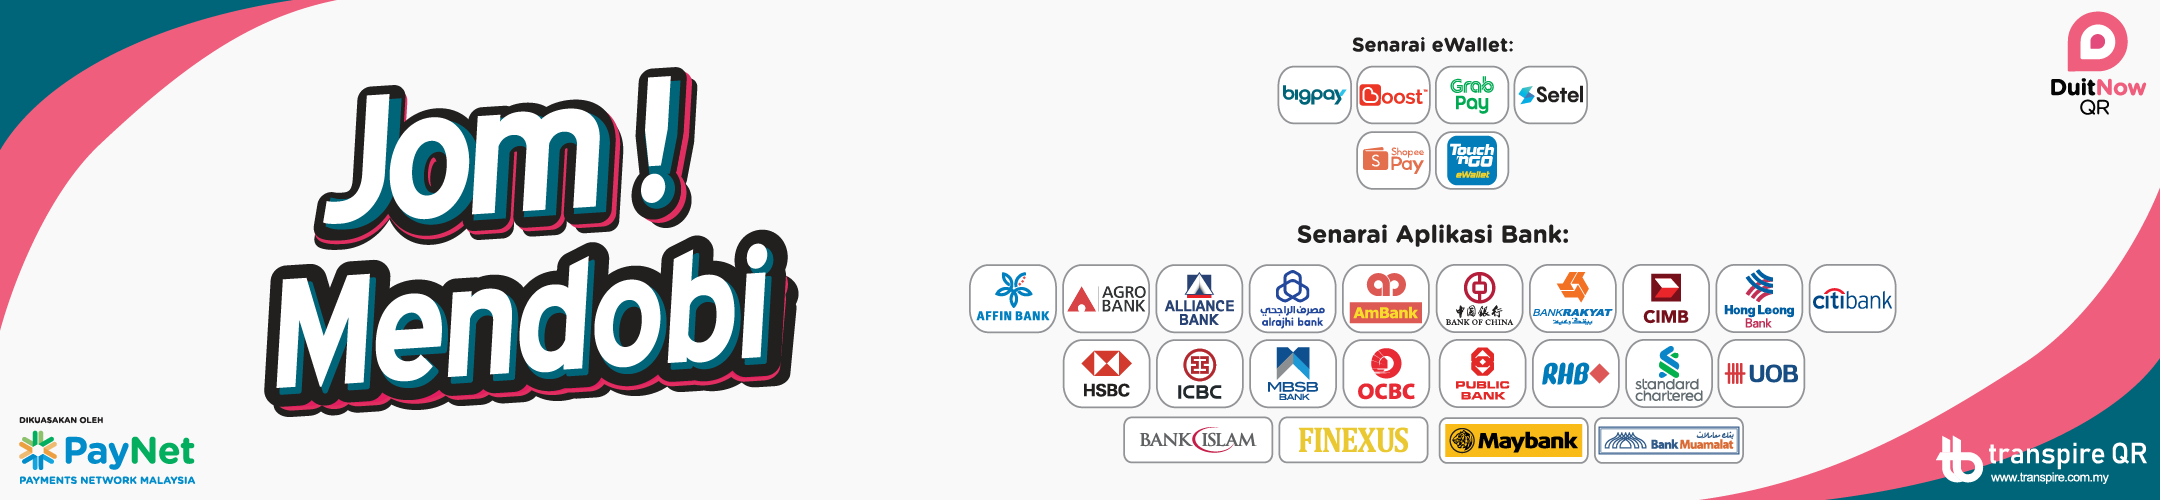 DuitNow QR system supports all major bank apps in Malaysia.